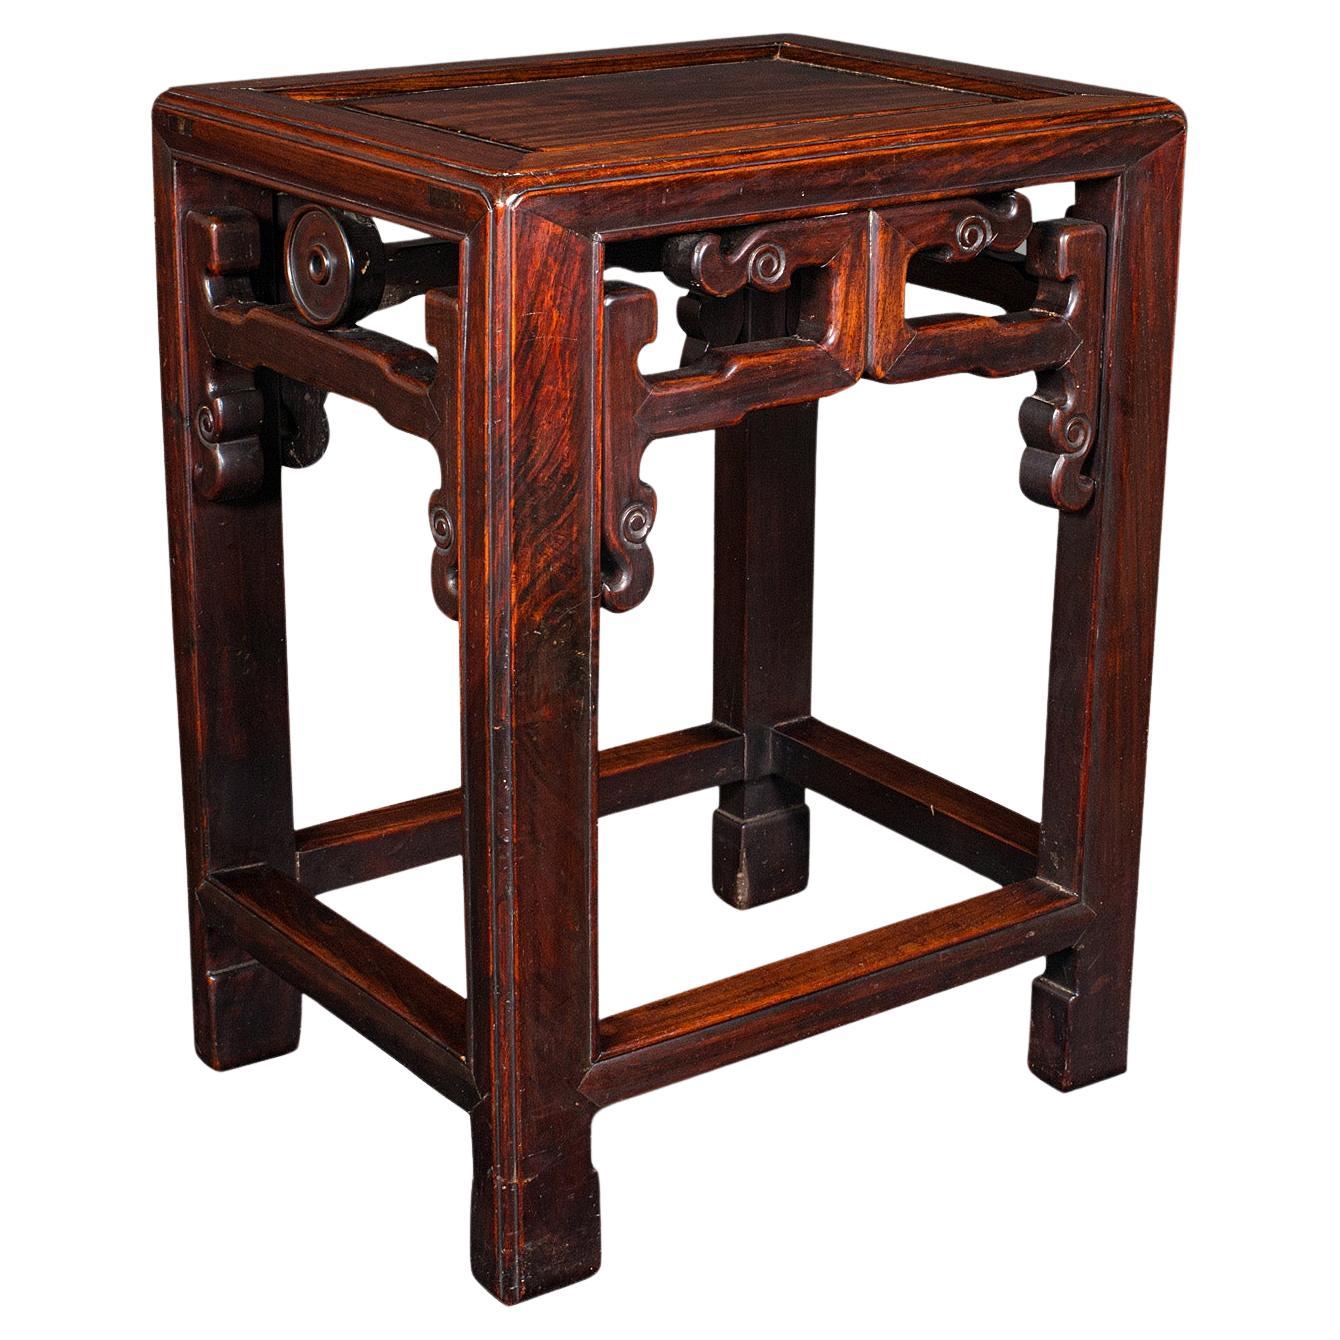 Antique Occasional Table, Chinese, Lamp, Jardiniere Stand, Victorian, Circa 1900 For Sale